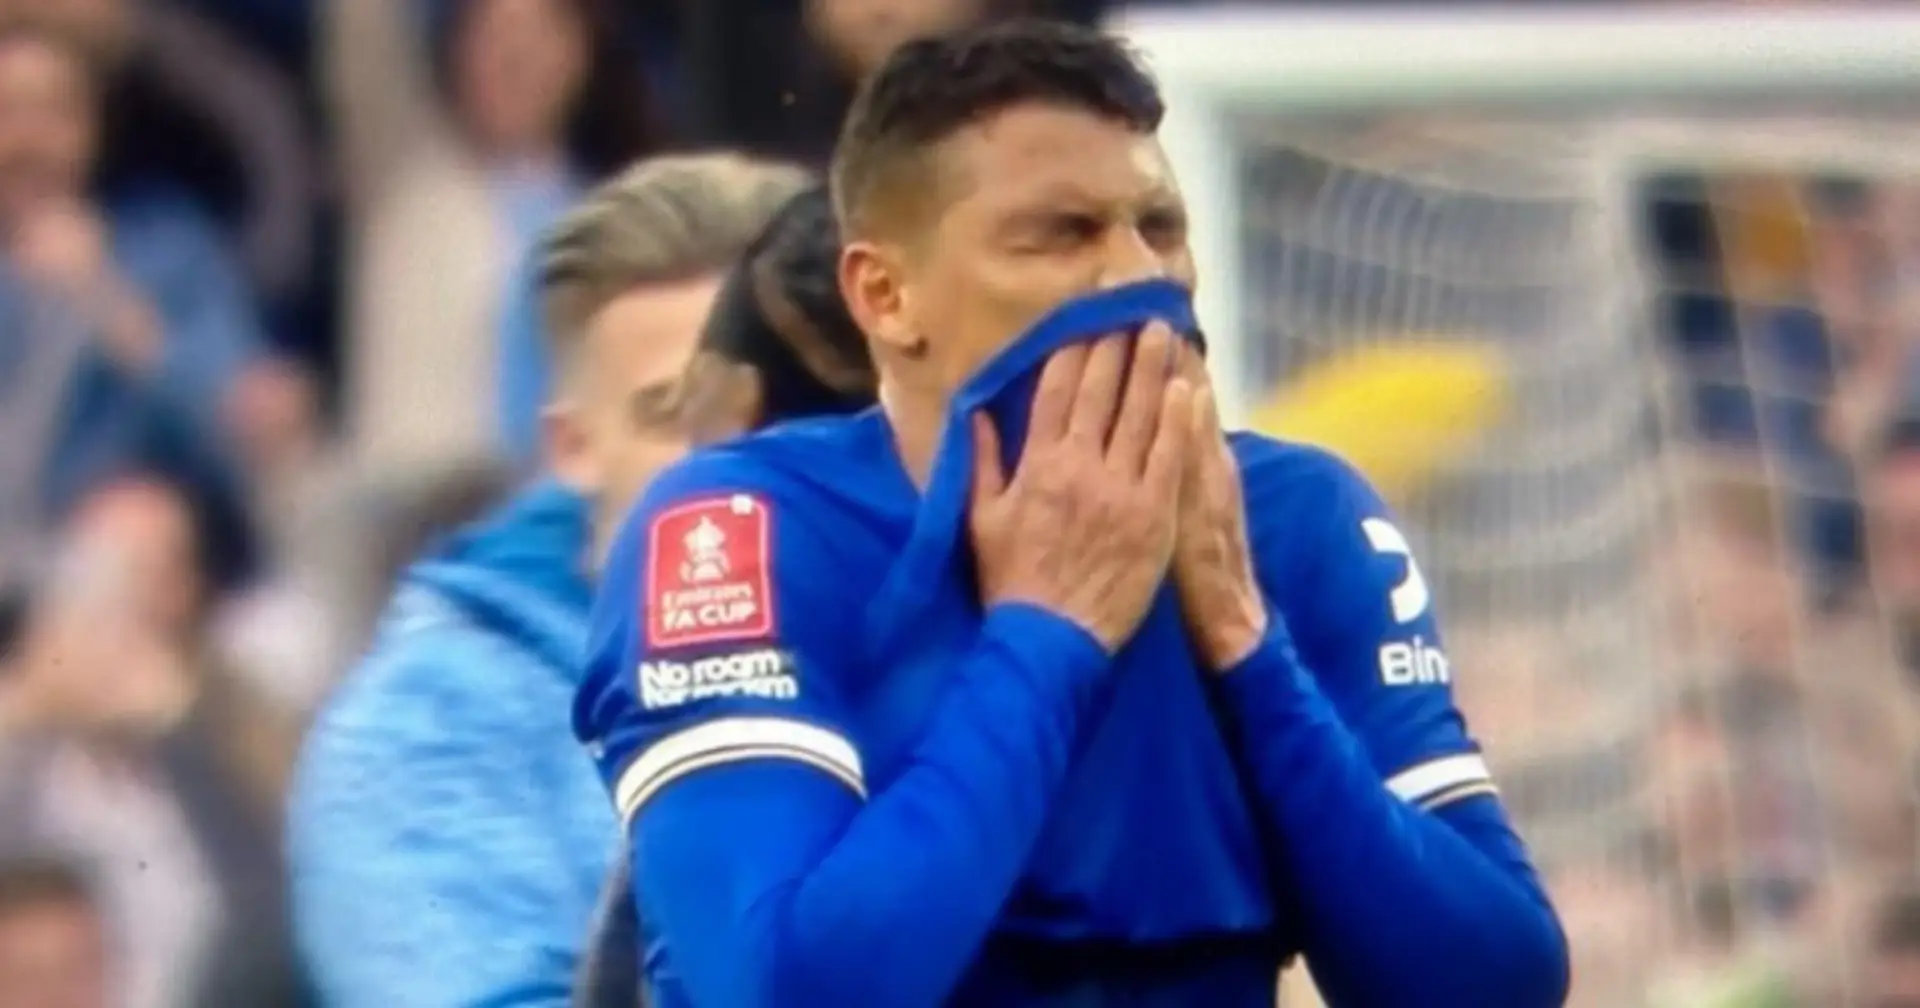 Spotted: Thiago Silva in tears after Man City defeat — it could've been his last trophy chance with Chelsea